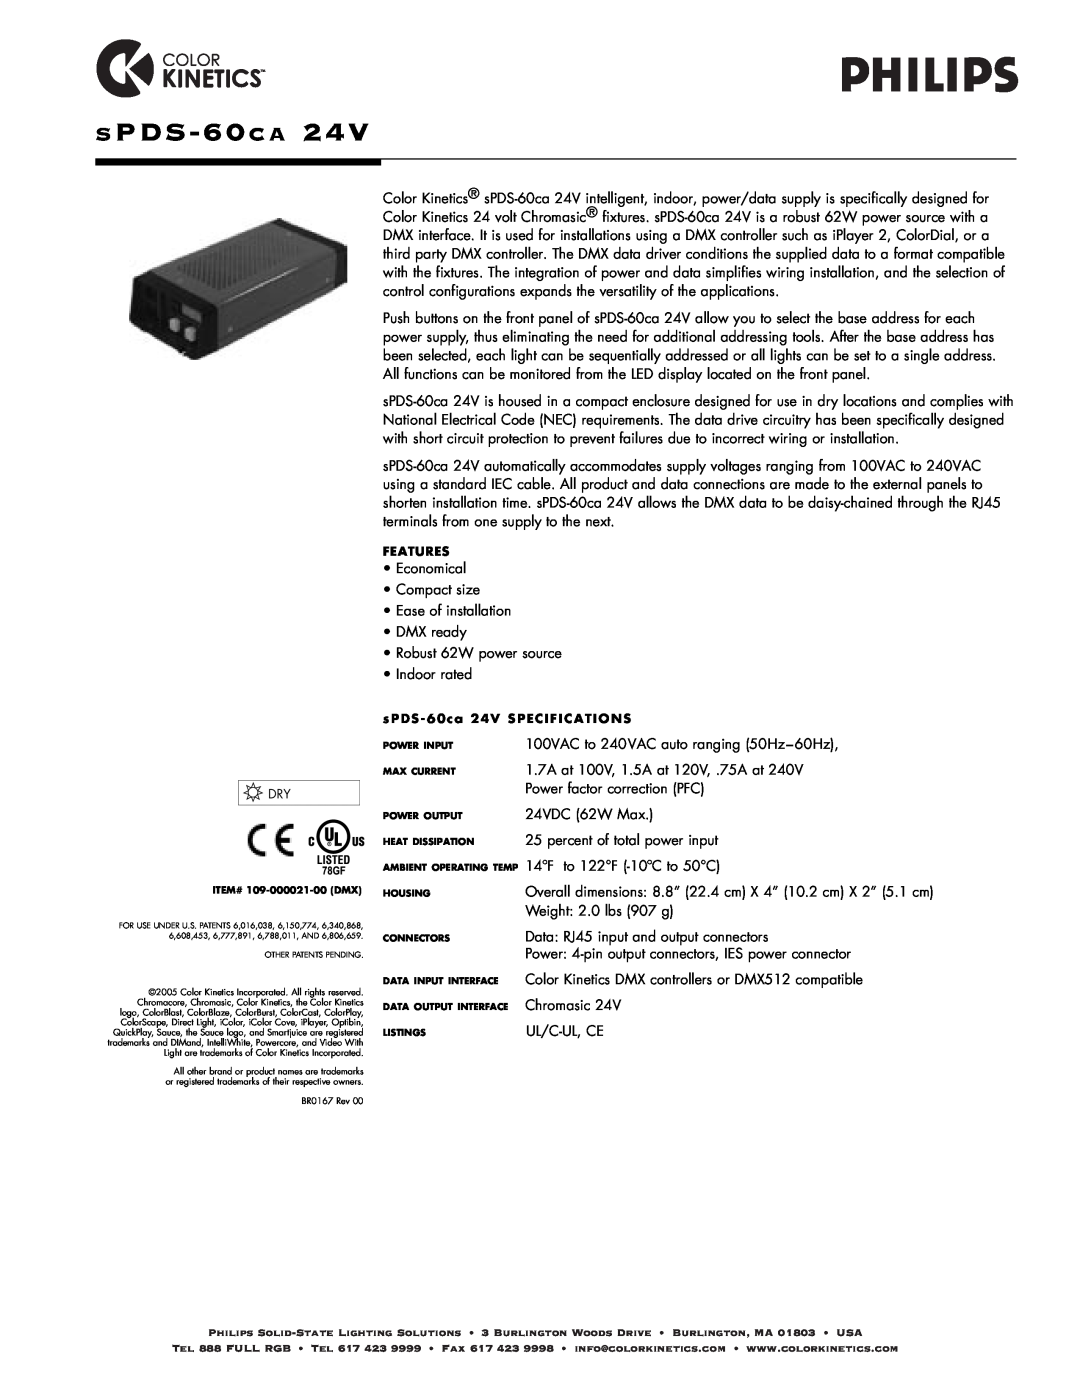 Philips SPDS-60CA 24V specifications S PDS-60C A 